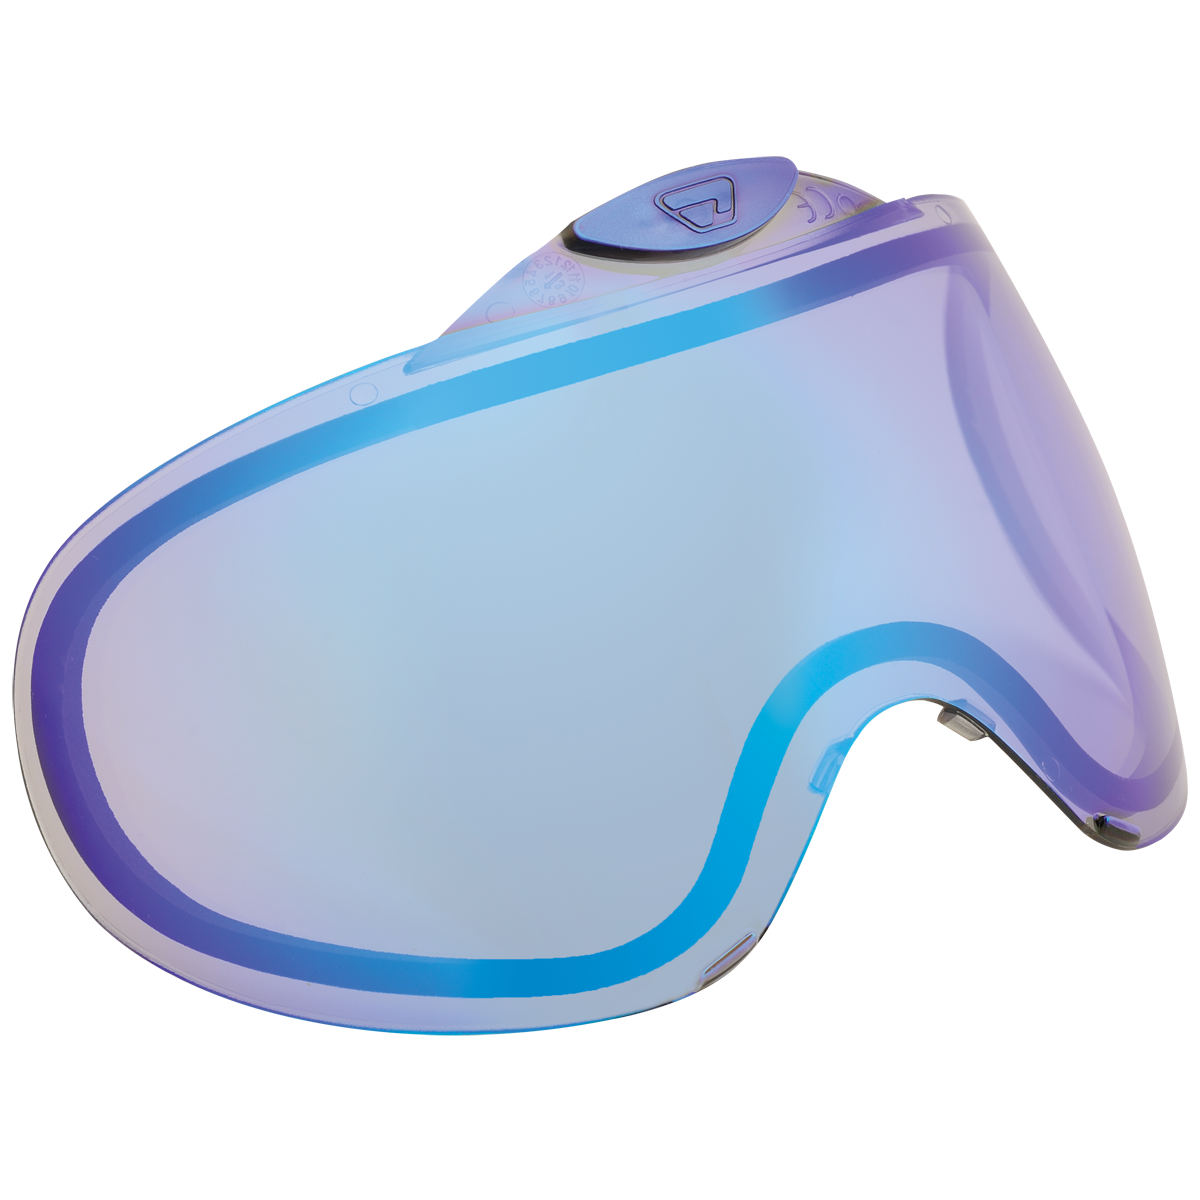 Proto Switch Thermal Lens - Blue Ice